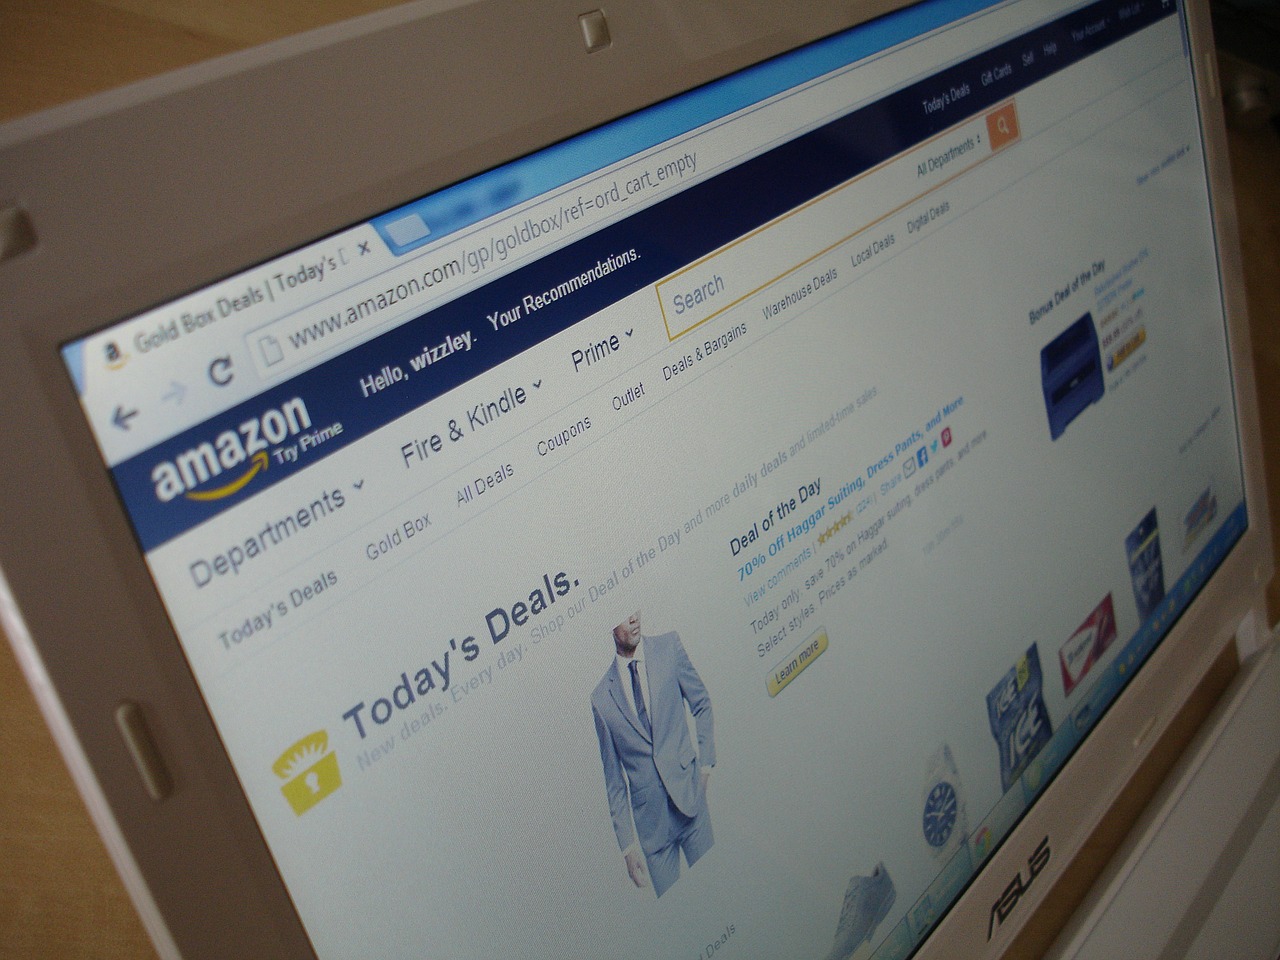 Amazon foreign websites blacklisted by US